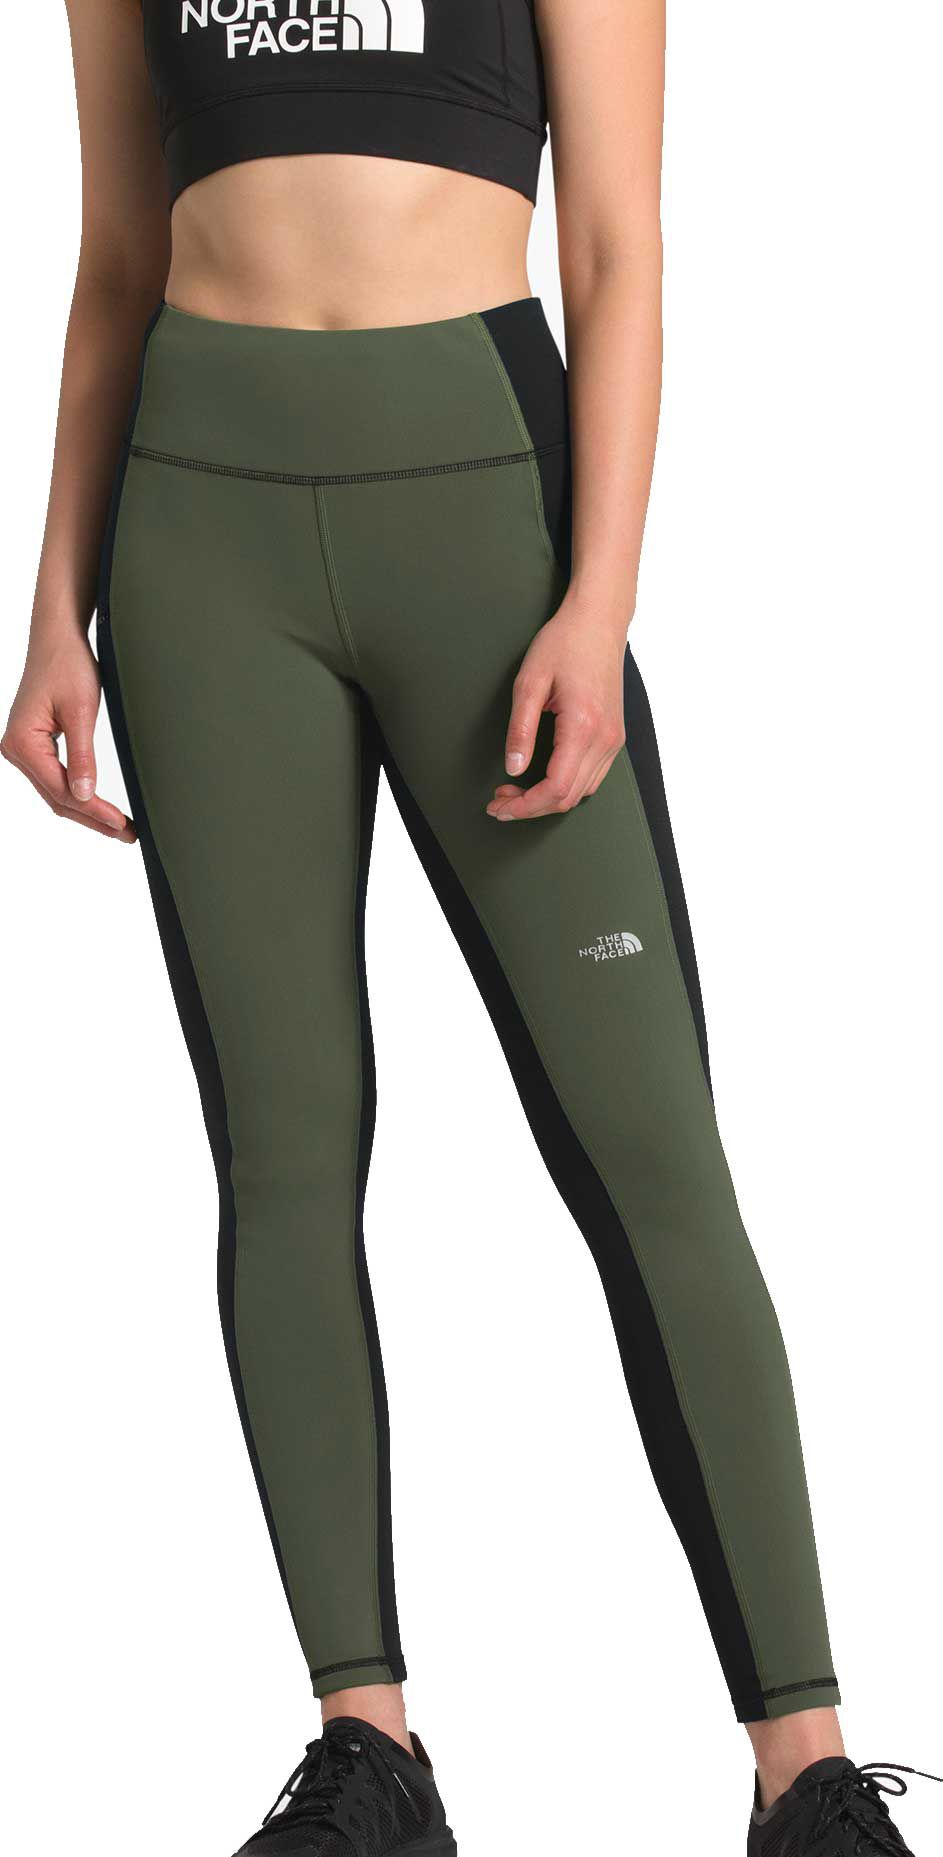 north face women's warm tights